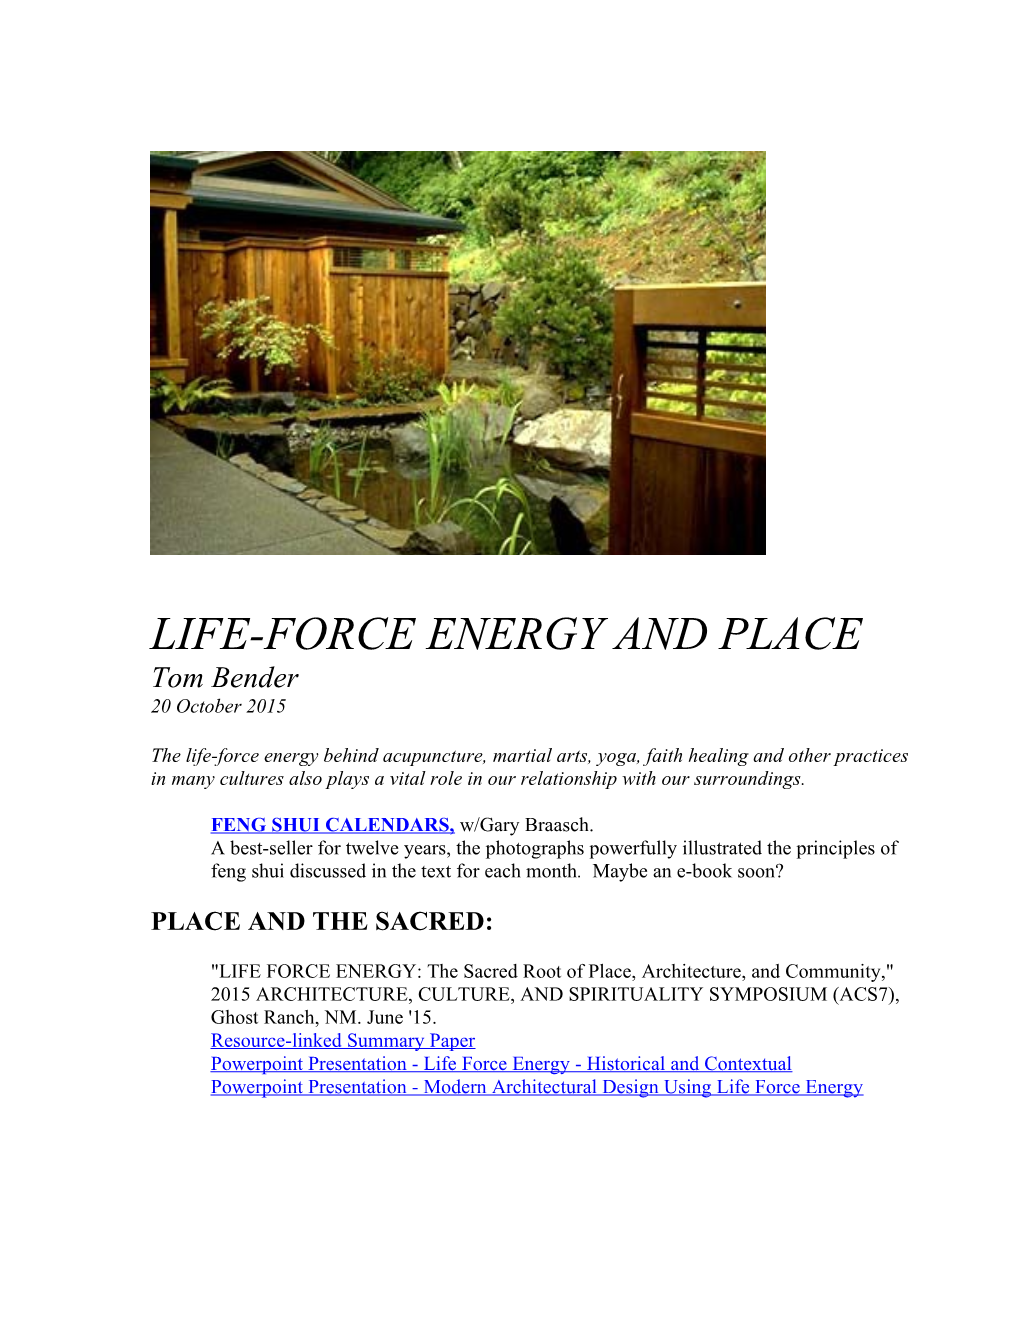 Life-Force Energy and Place